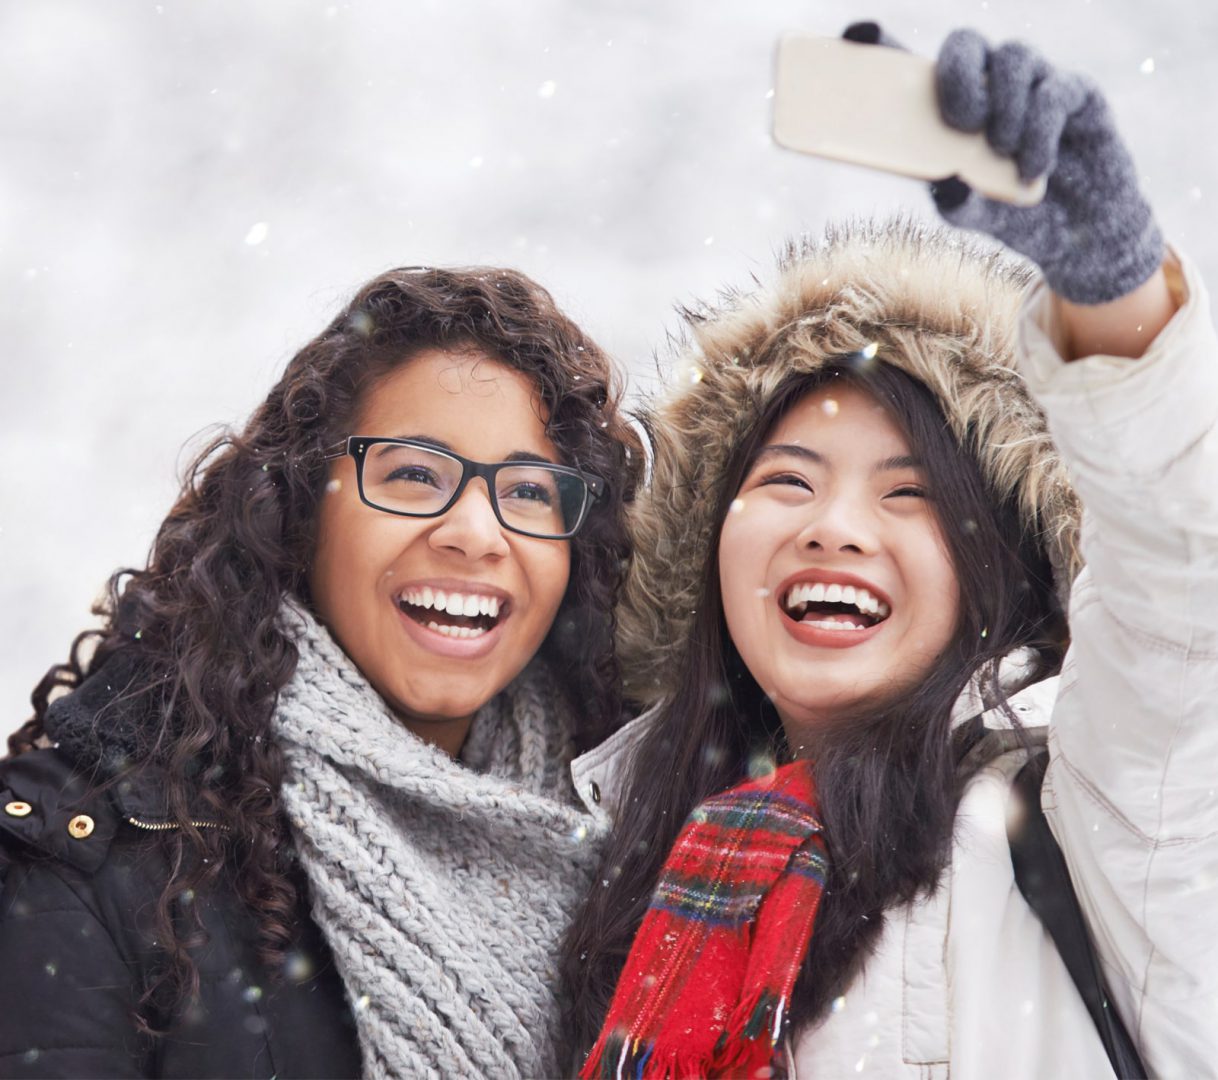 Two tourists taking a selfie while snowing